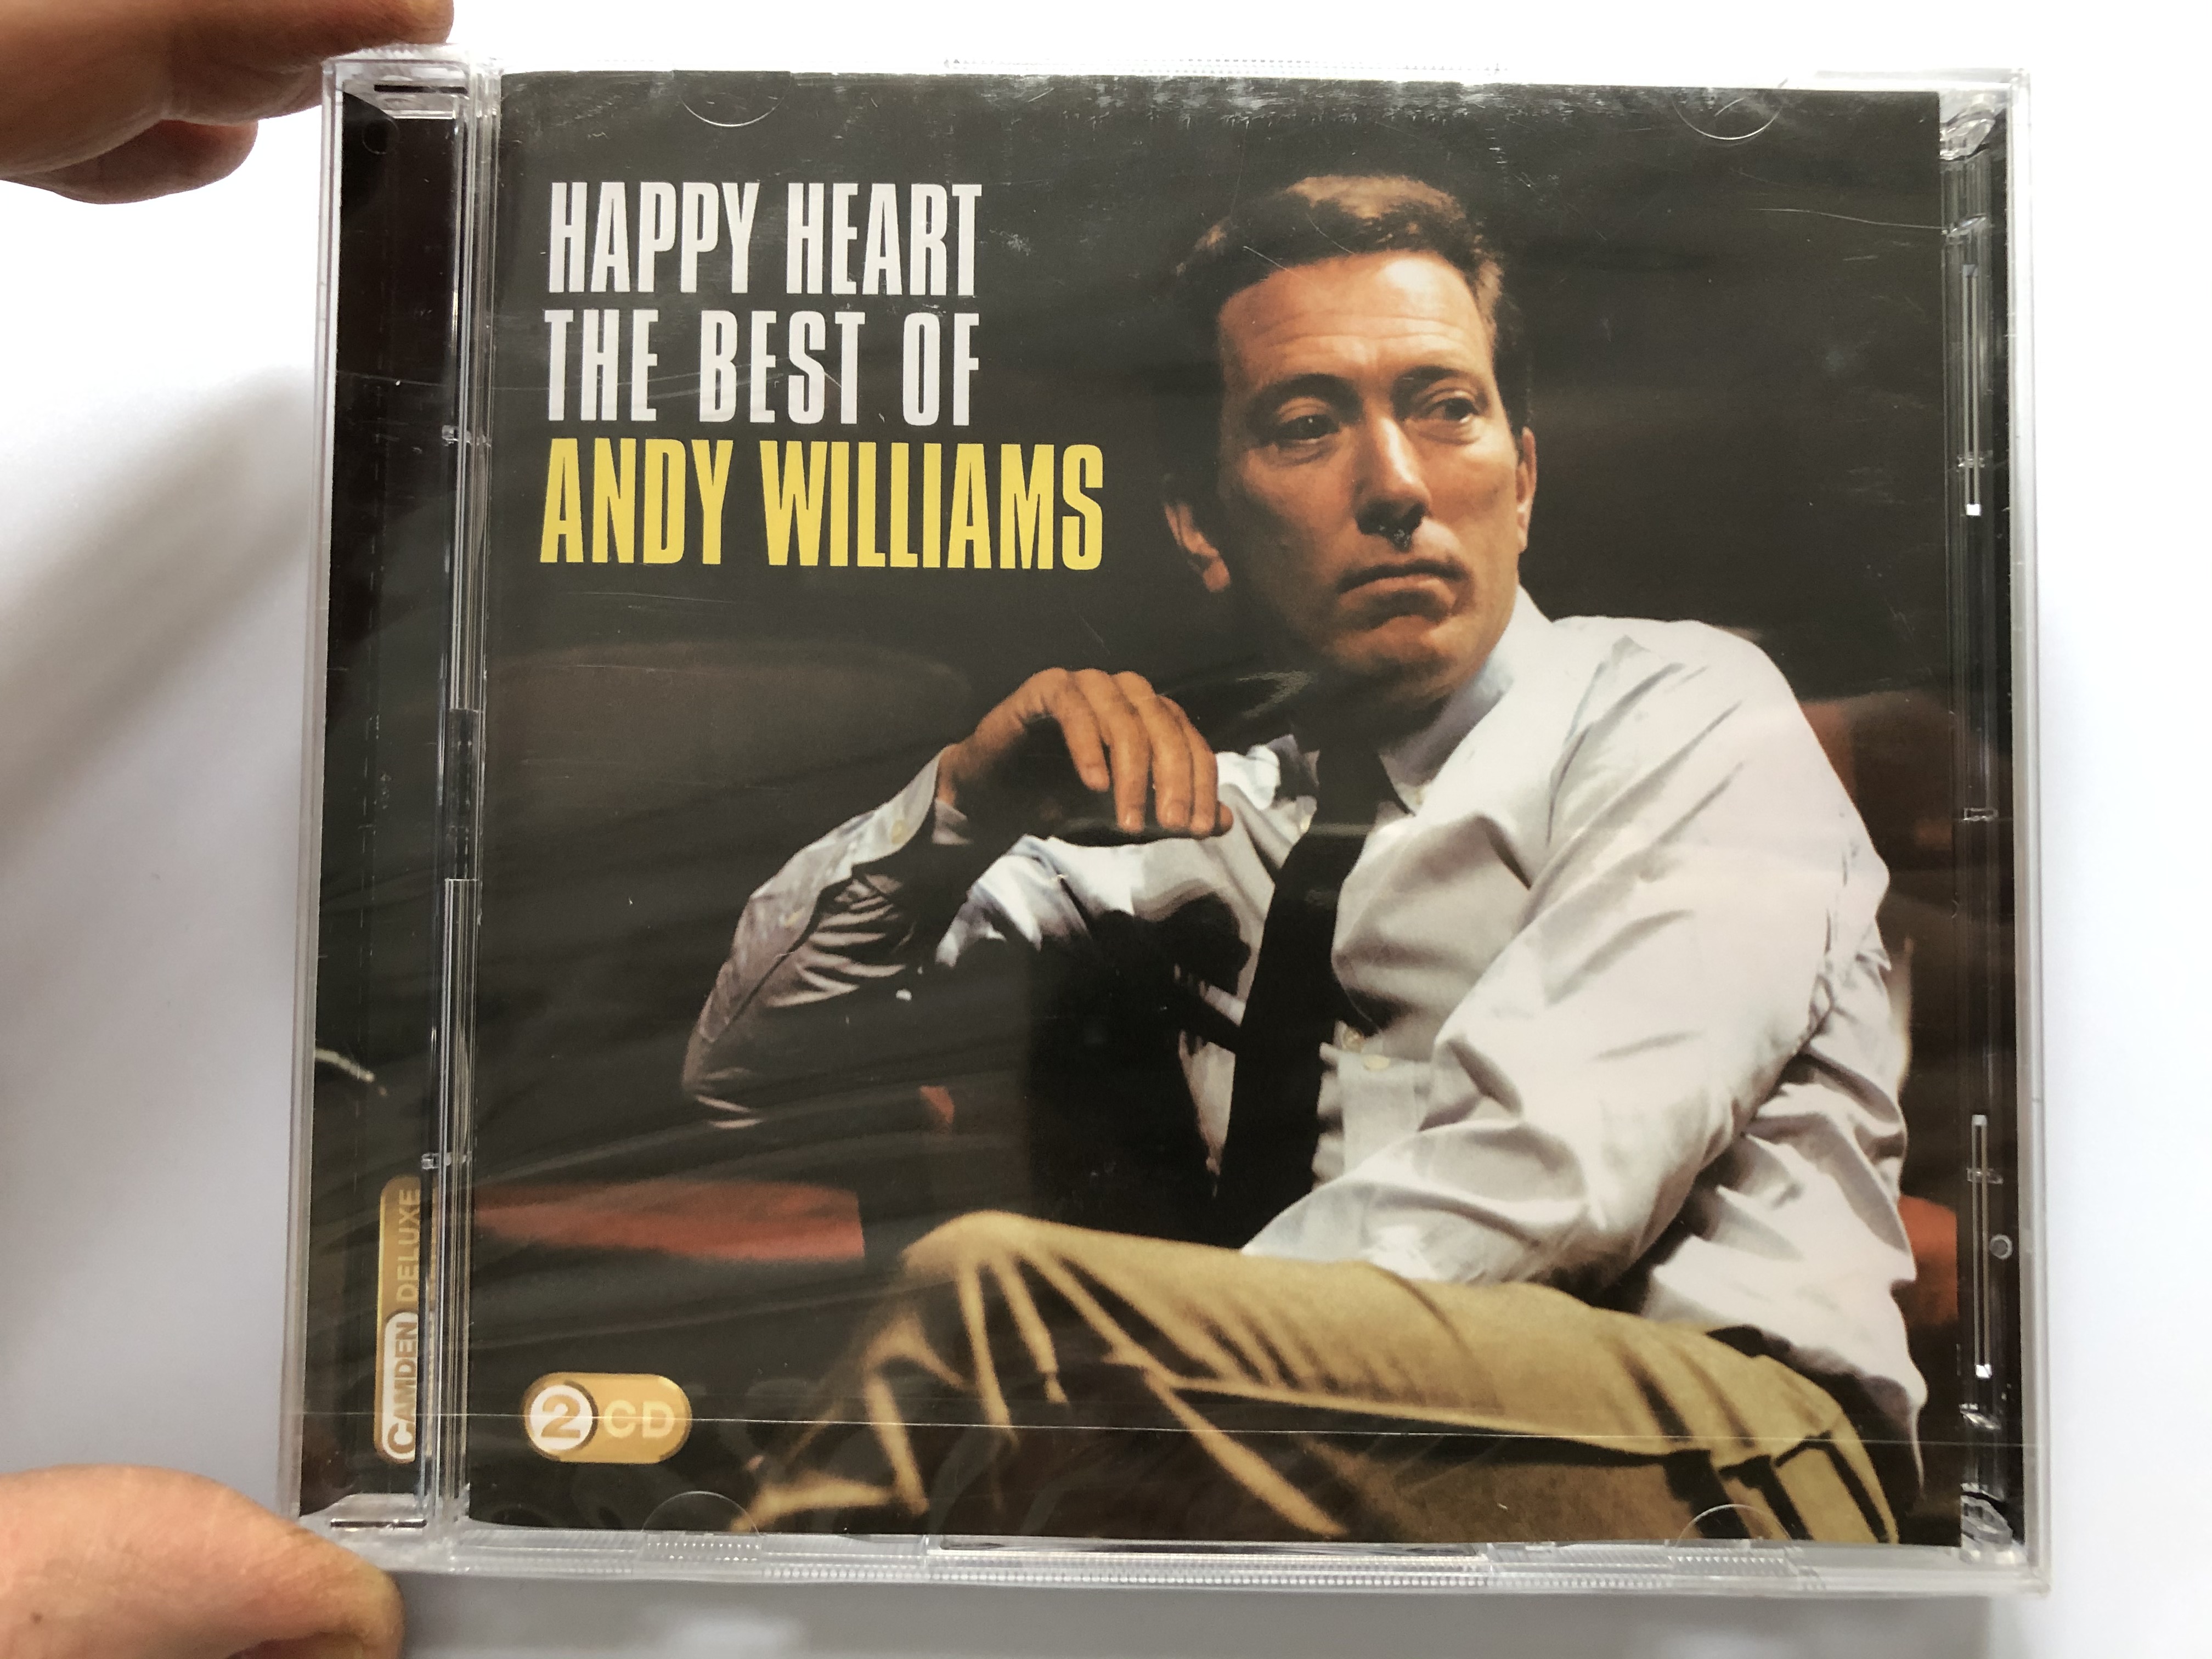 happy-heart-the-best-of-andy-williams-sony-music-2x-audio-cd-2009-88697536542-1-.jpg